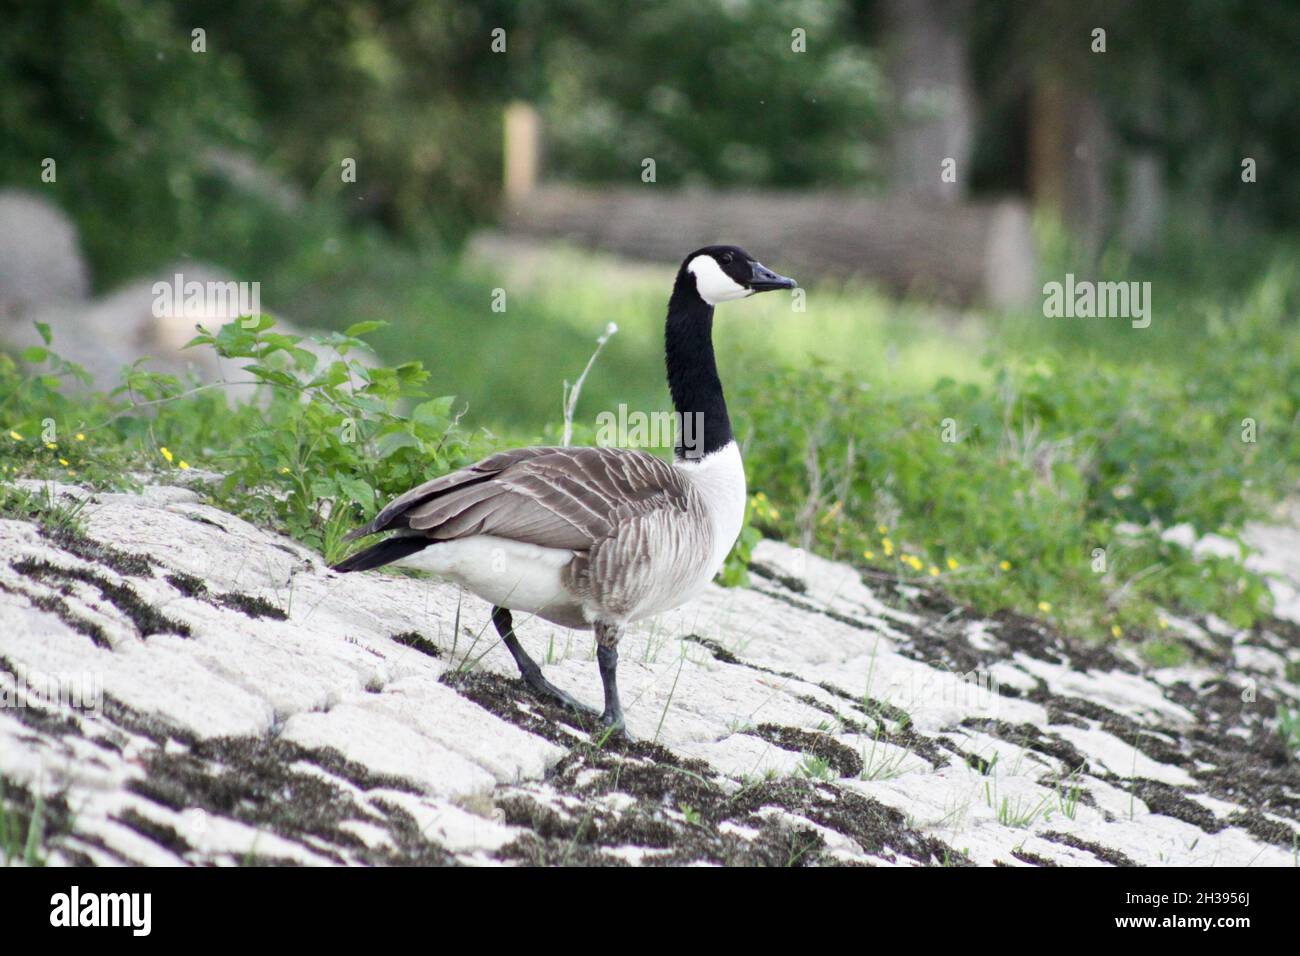 Branta Canadensis (Canada goose) standing on the rocks Stock Photo